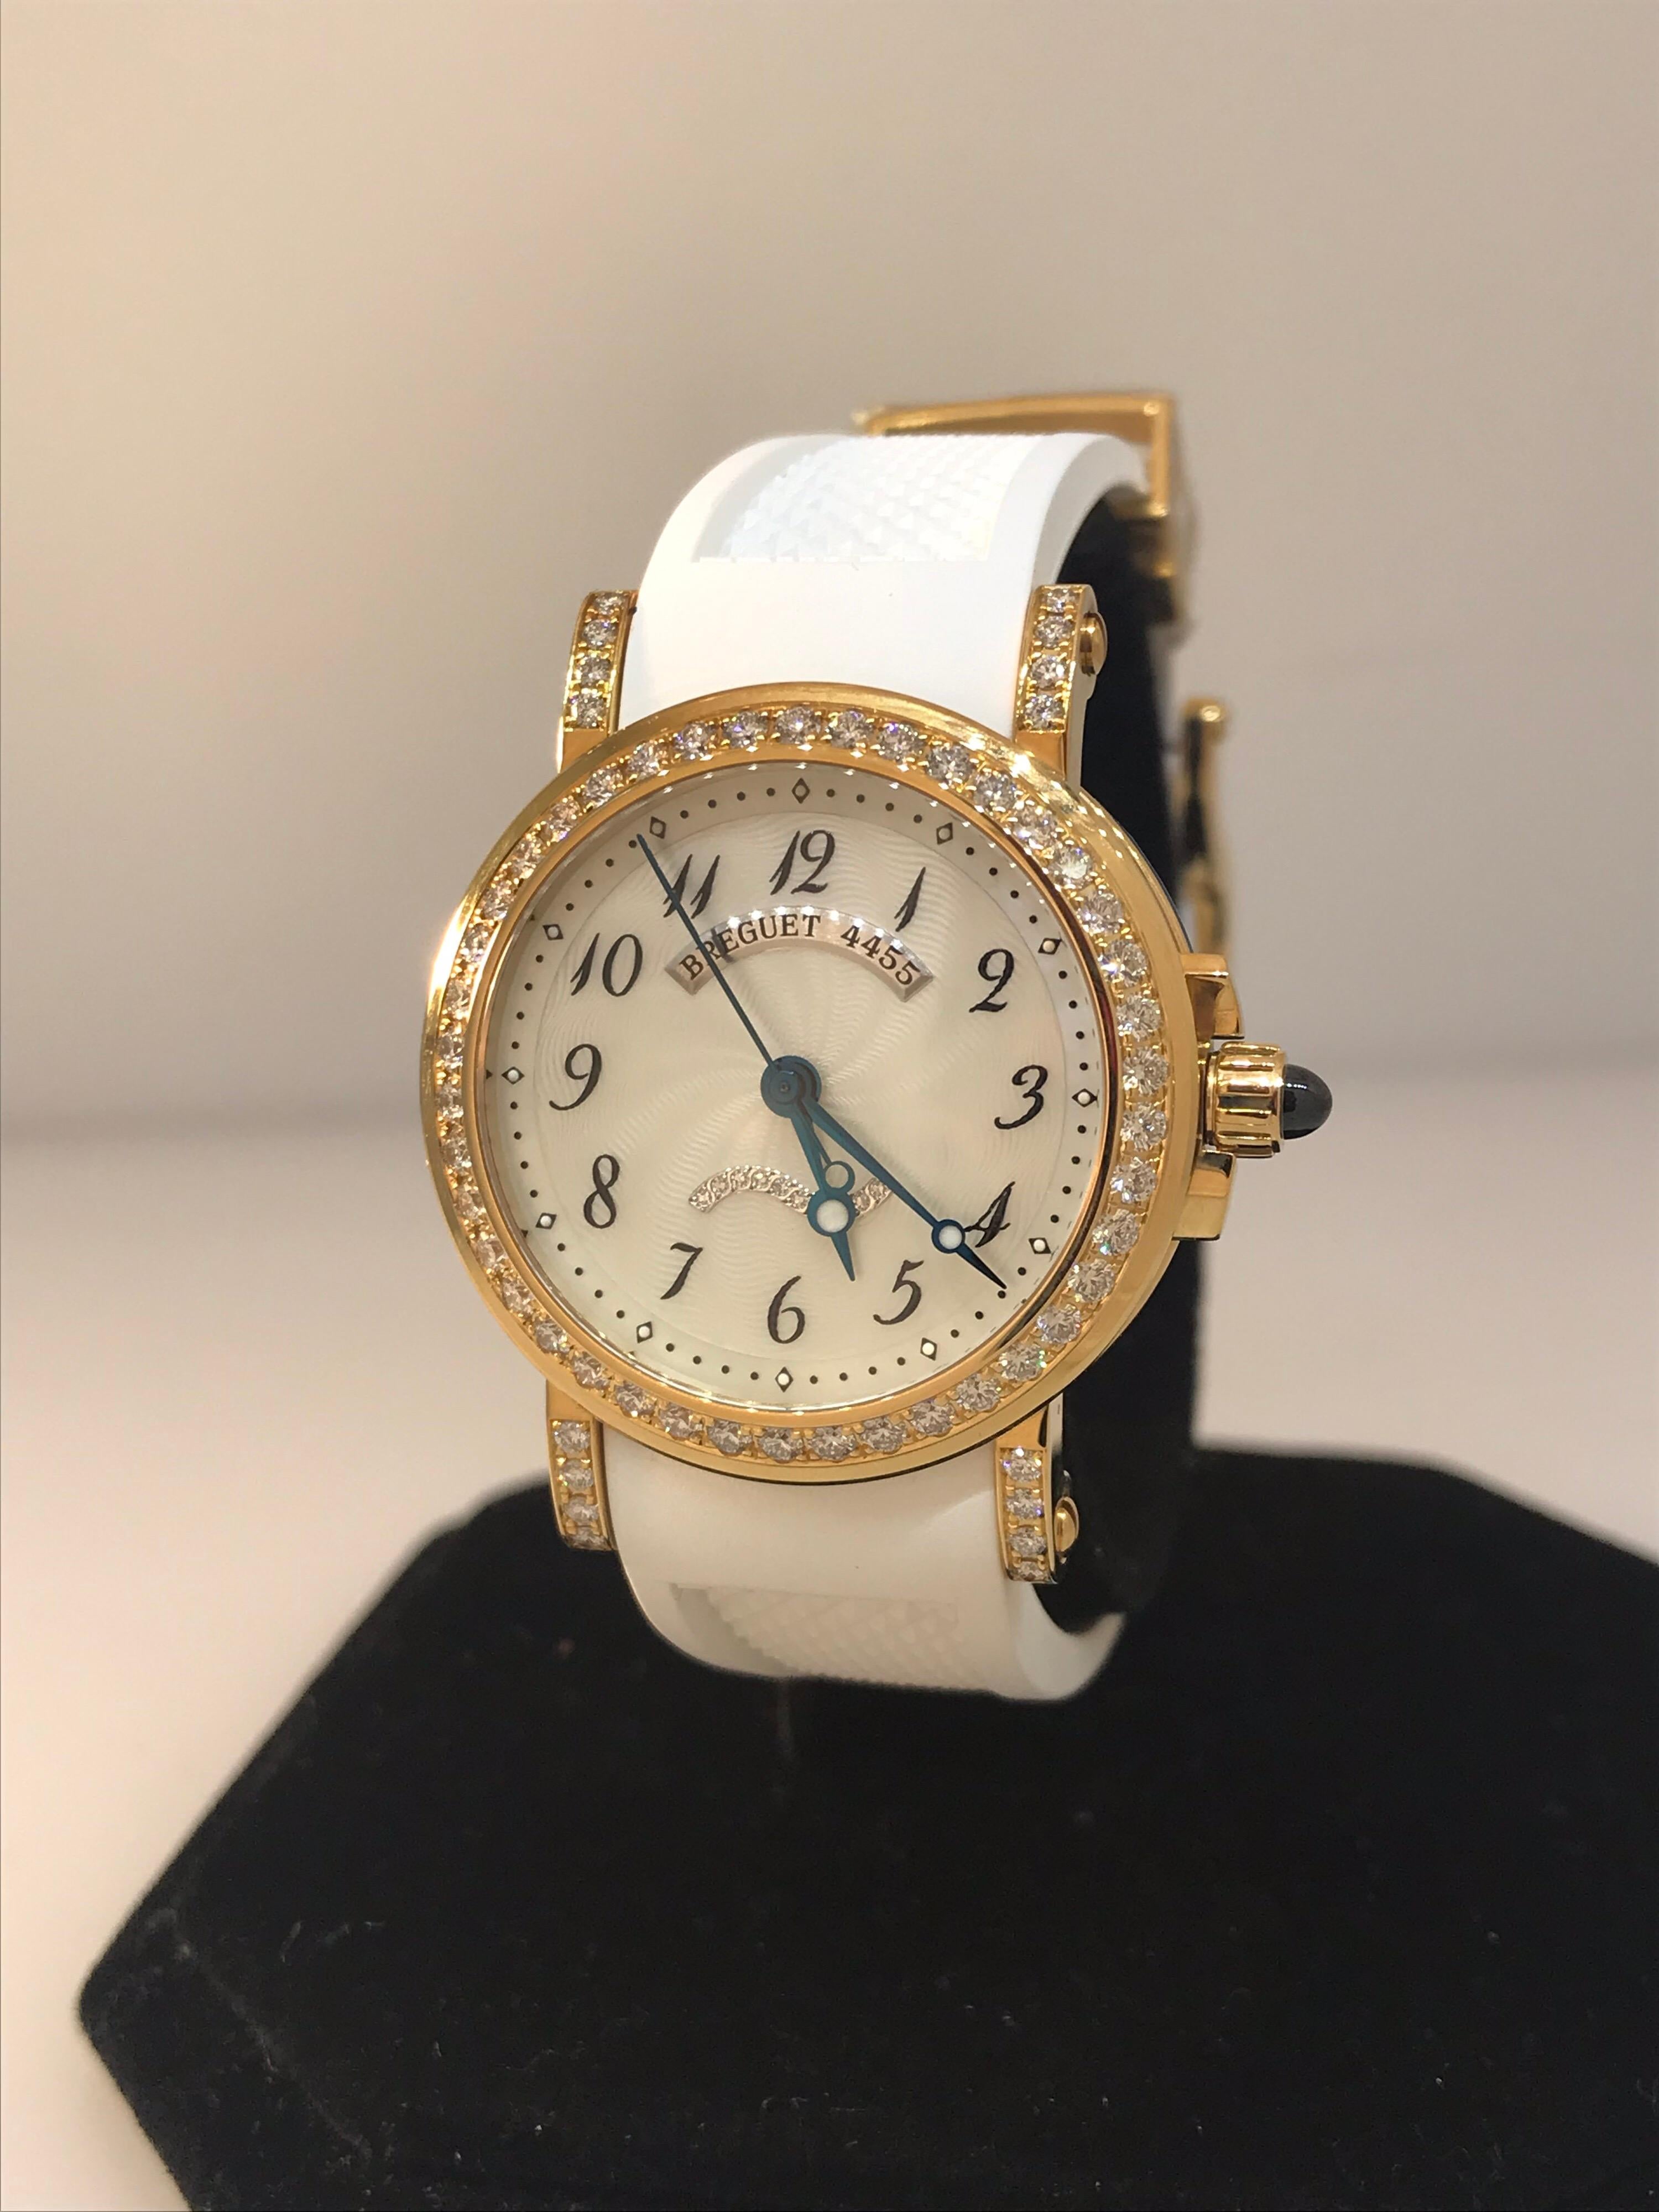 Breguet Marine Ladies Watch

Model Number: 8818ba/59/564.dd00

100% Authentic

Brand New

Comes with original Breguet Box and Papers

18 Karat Yellow Gold Case & Buckle

Bezel and lugs set with 58 diamonds (1.25 Carats)

White dial set with 10